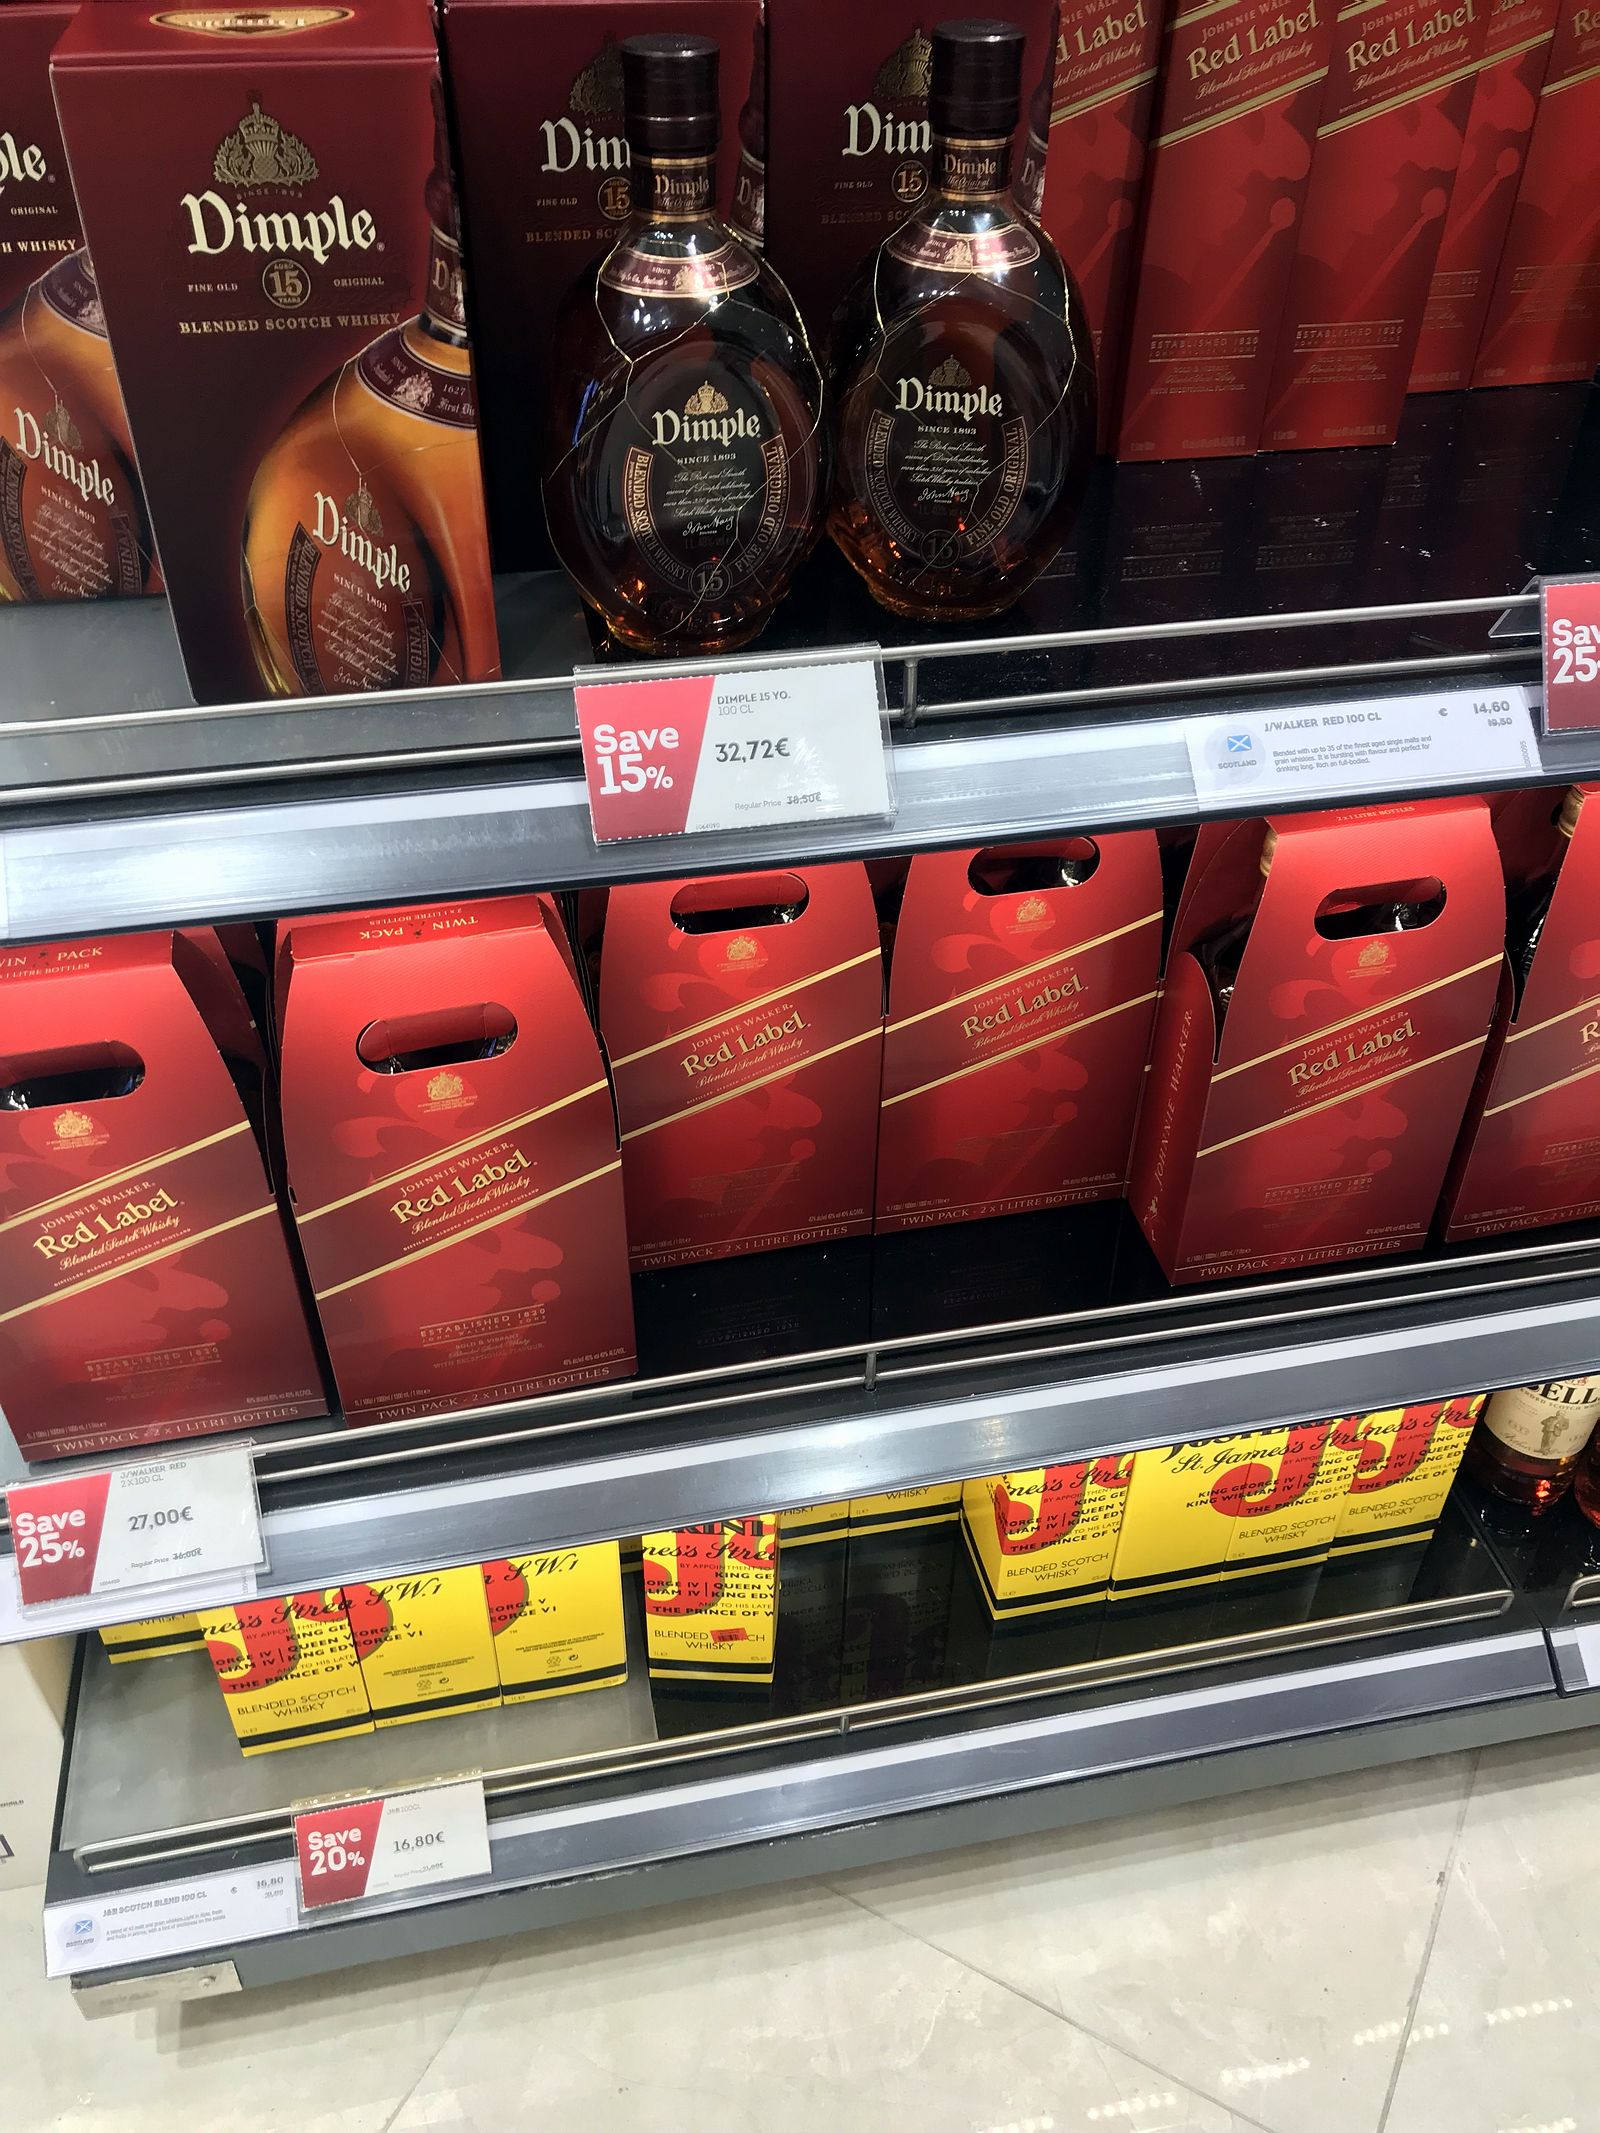 Duty free Antalya, august 2019, whiskey Dimple, Red Label, J&B 